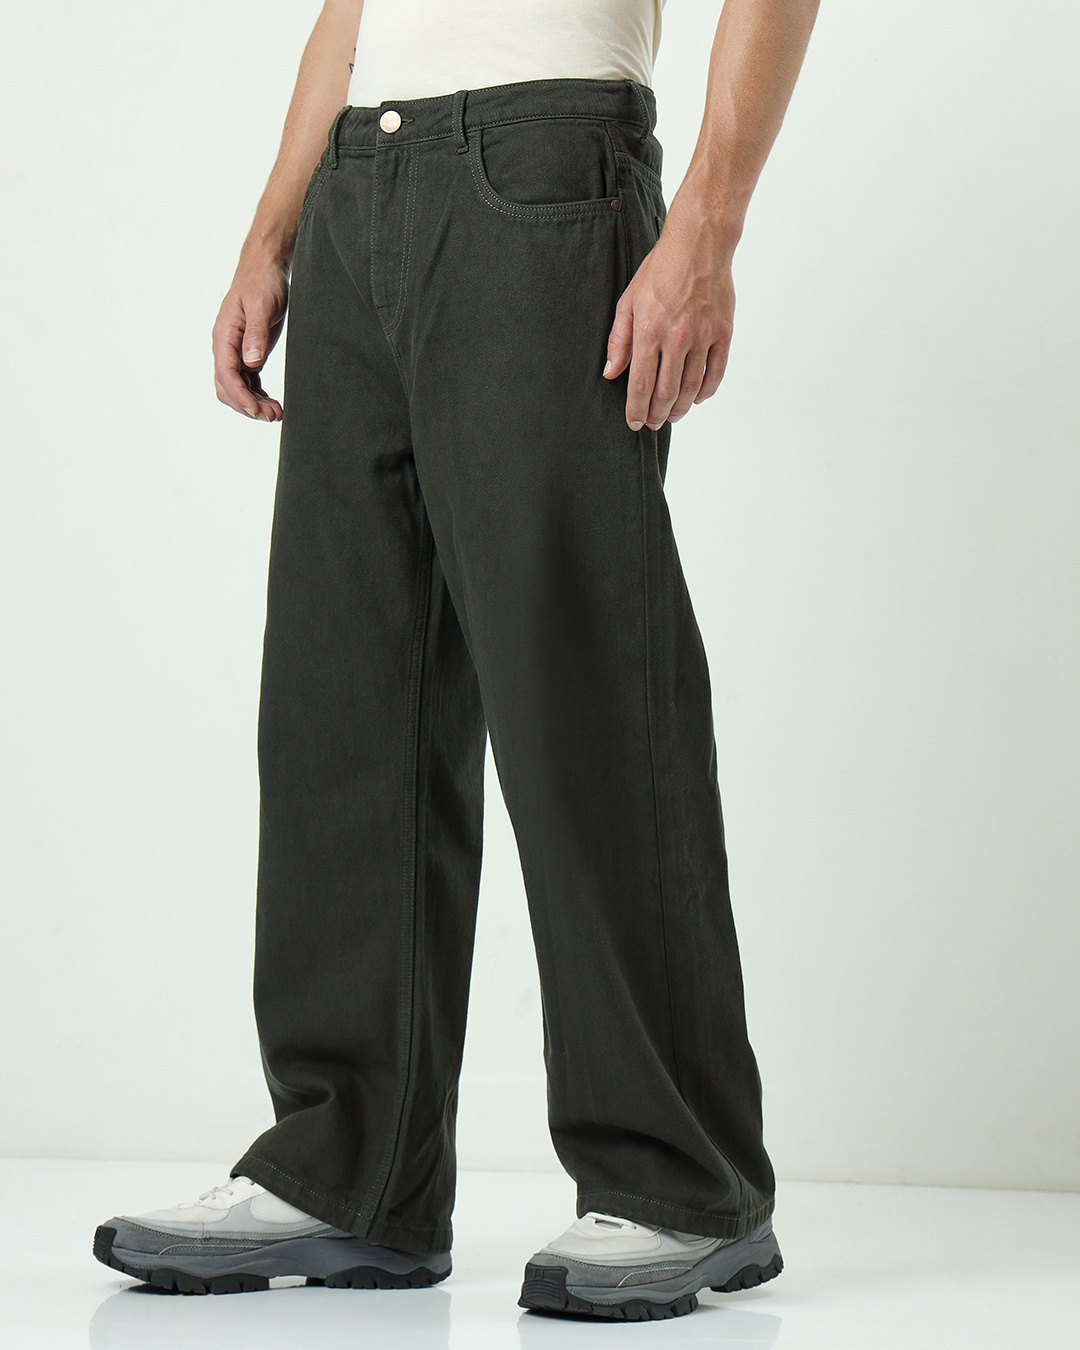 Men’s Olive Baggy Straight Fit Jeans